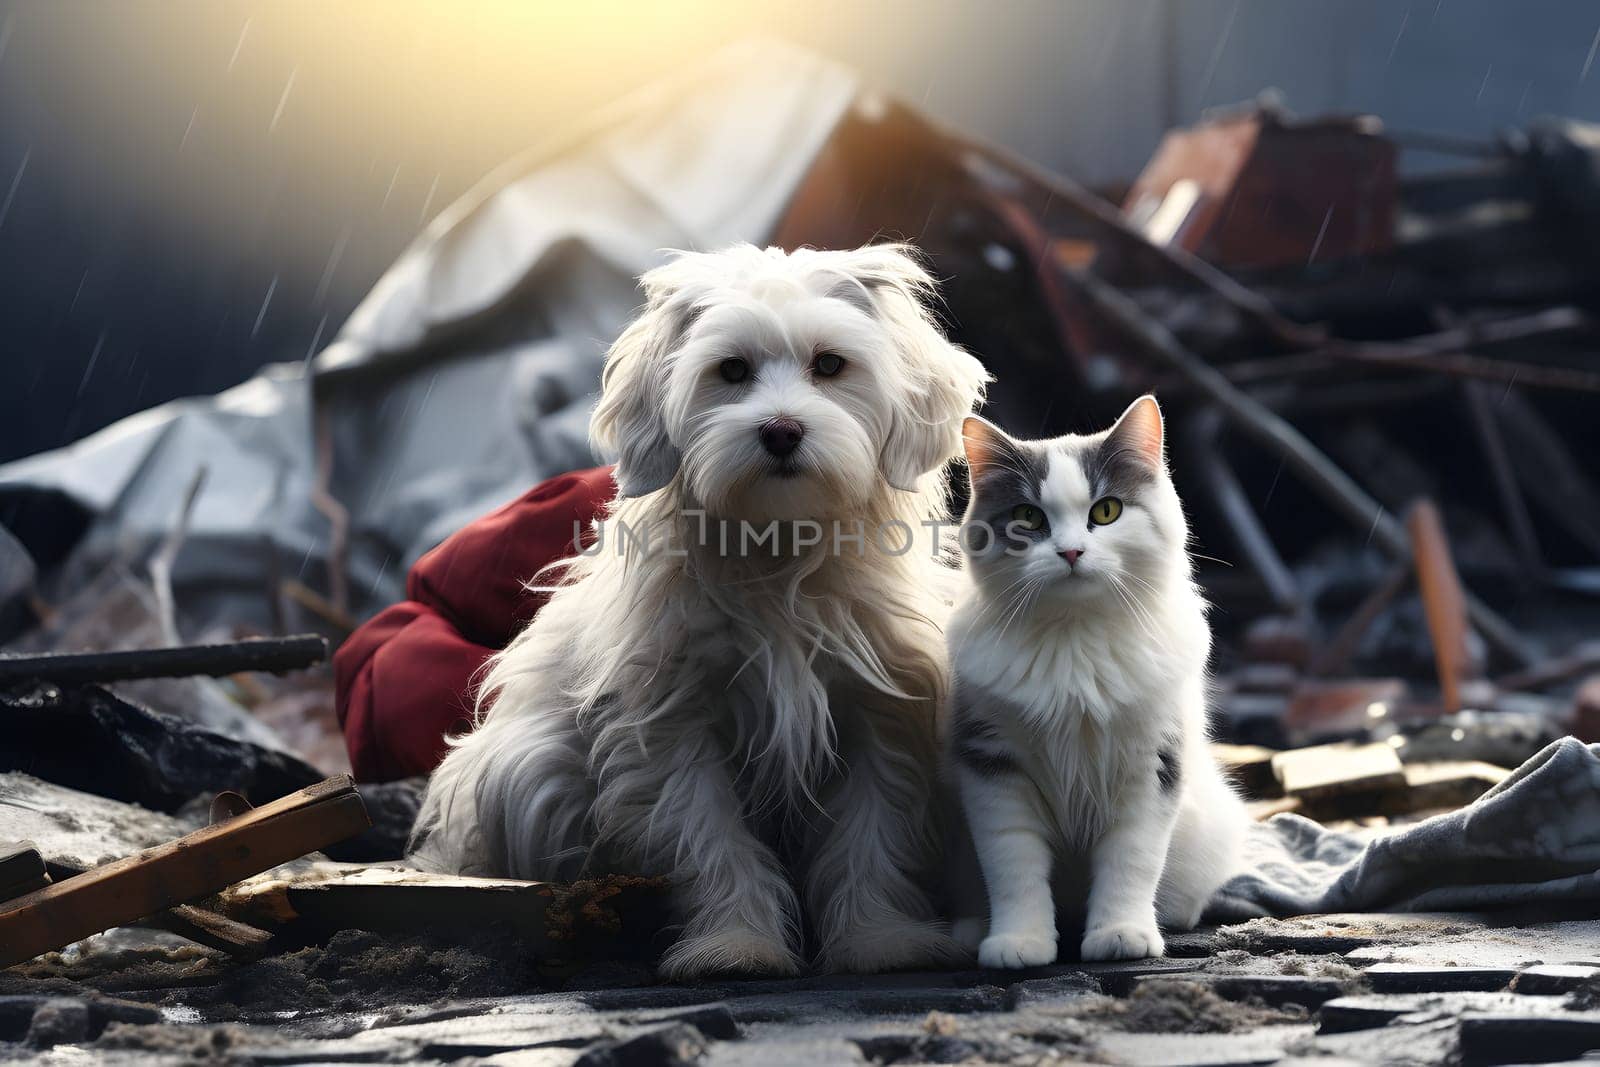 Alone and hungry pets after disaster on the background of house rubble. Neural network generated image. Not based on any actual scene.